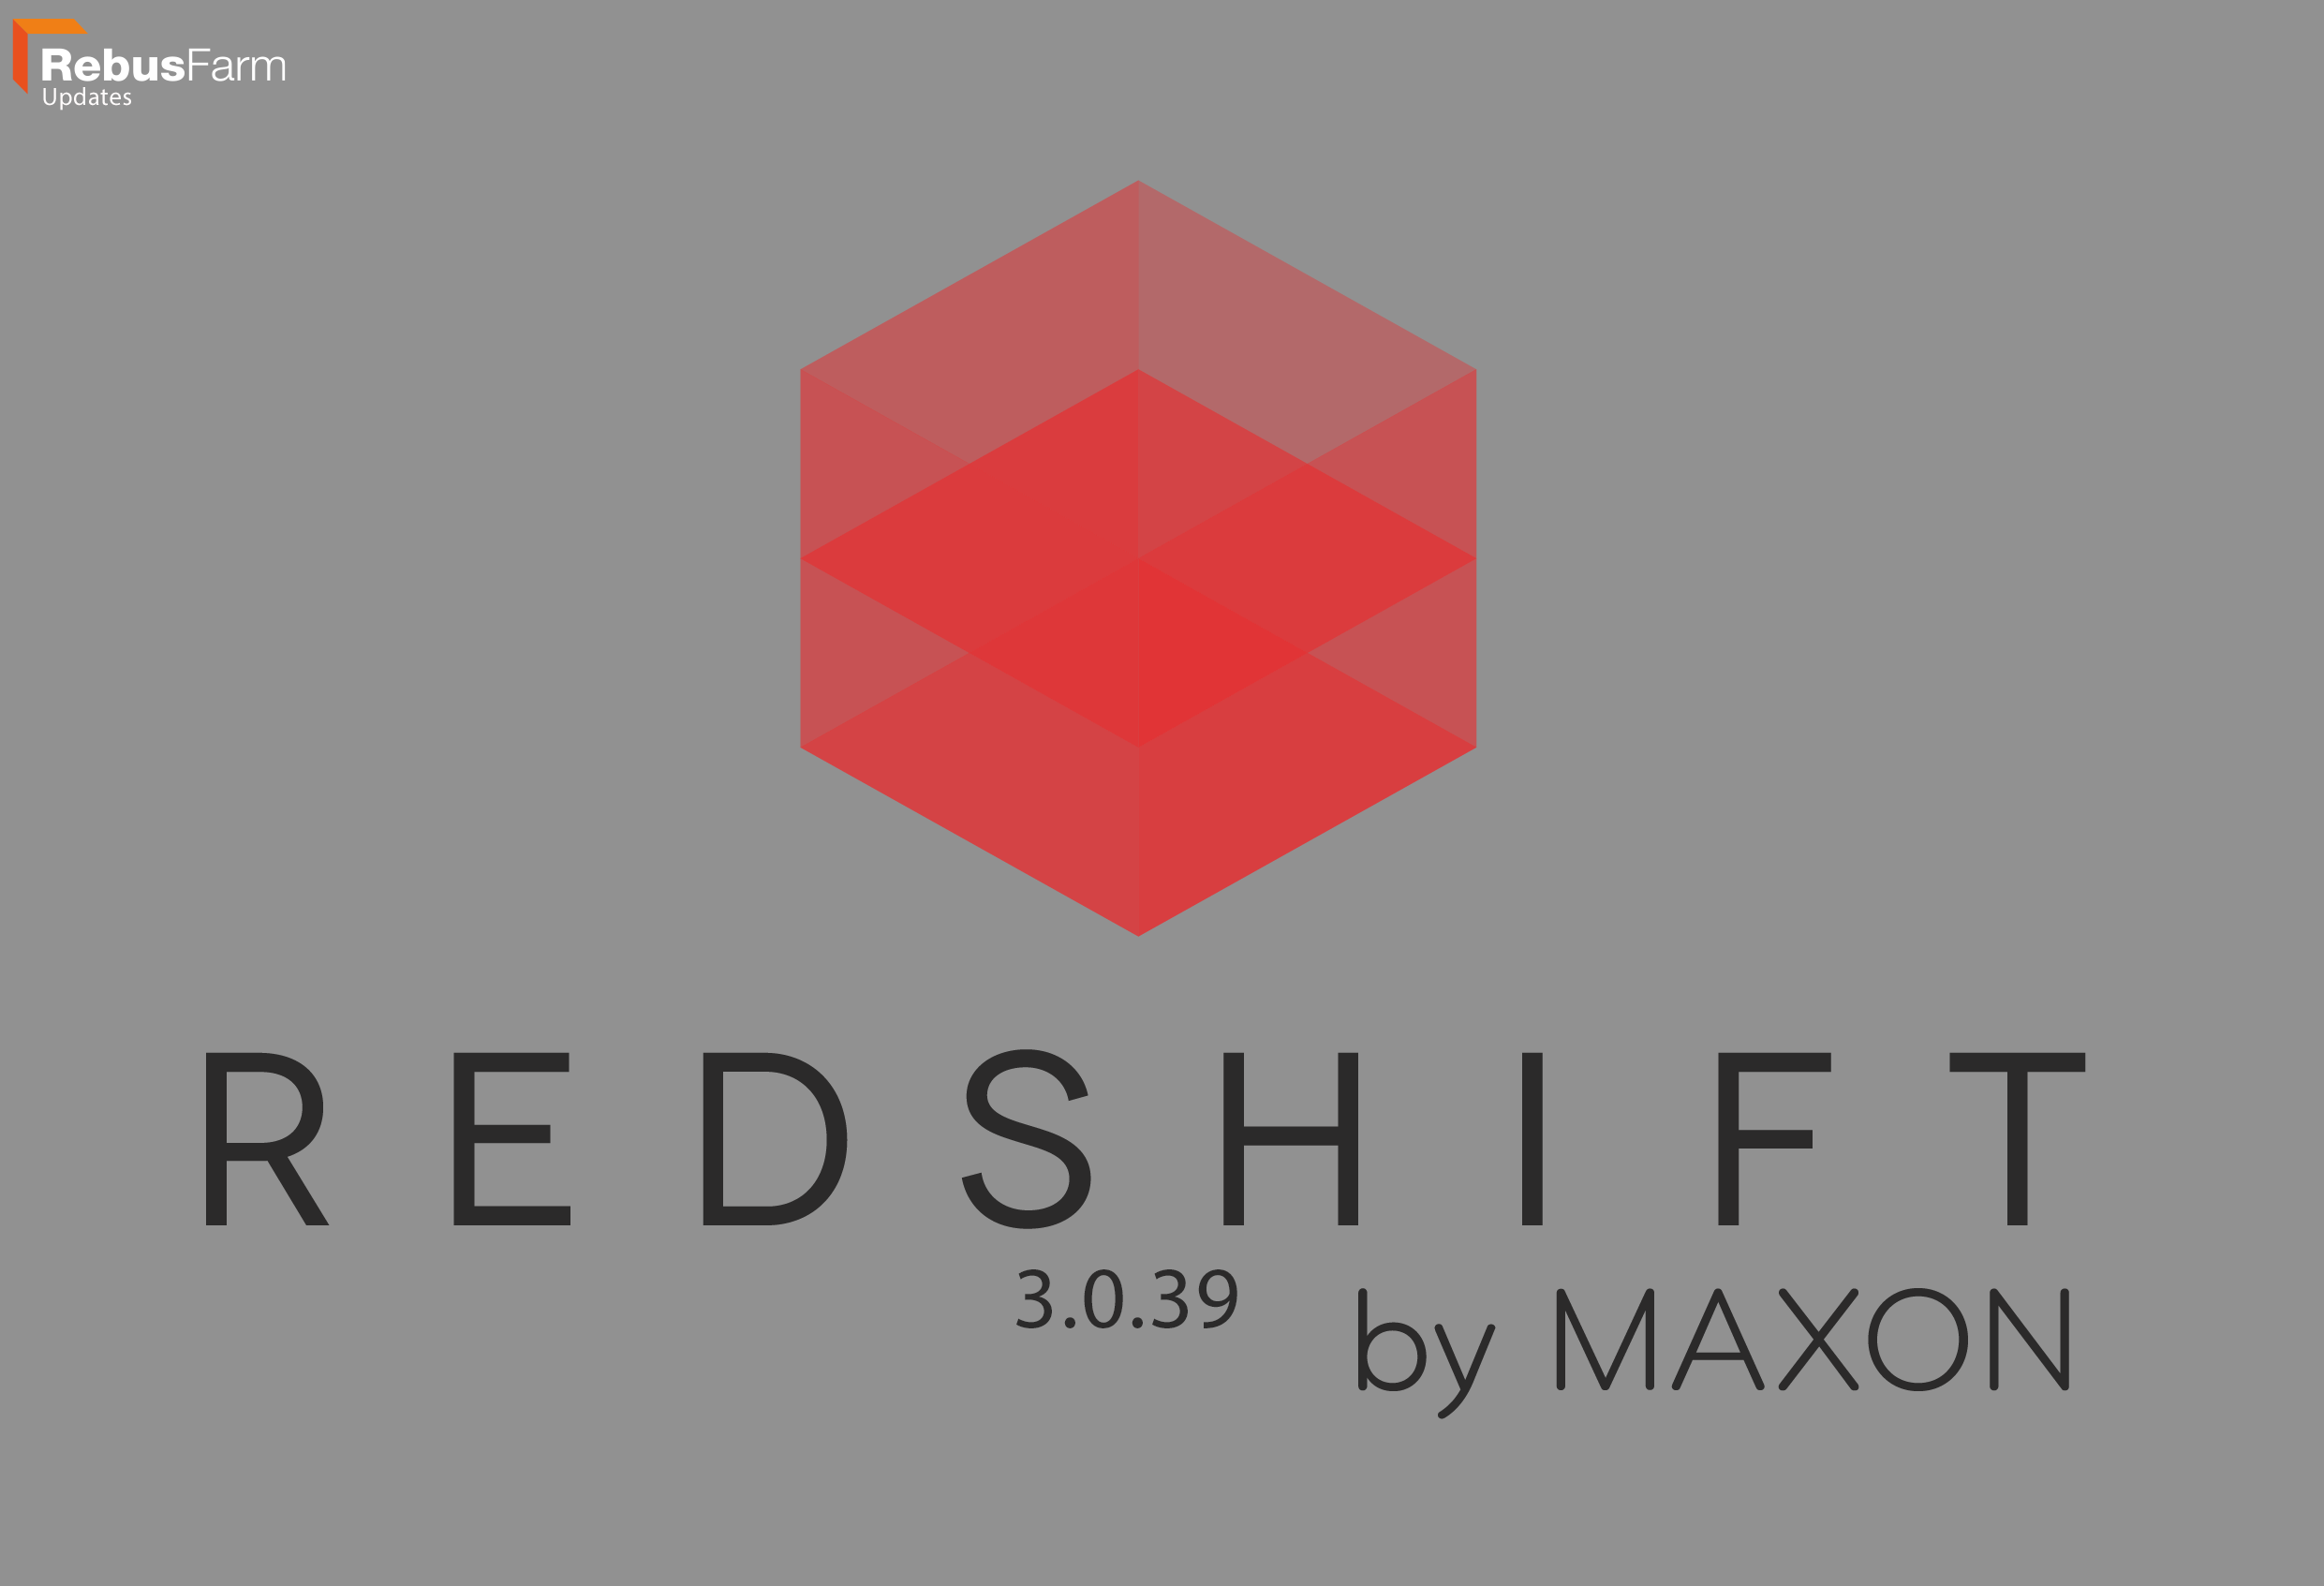 Redshift Updated to 3.0.39